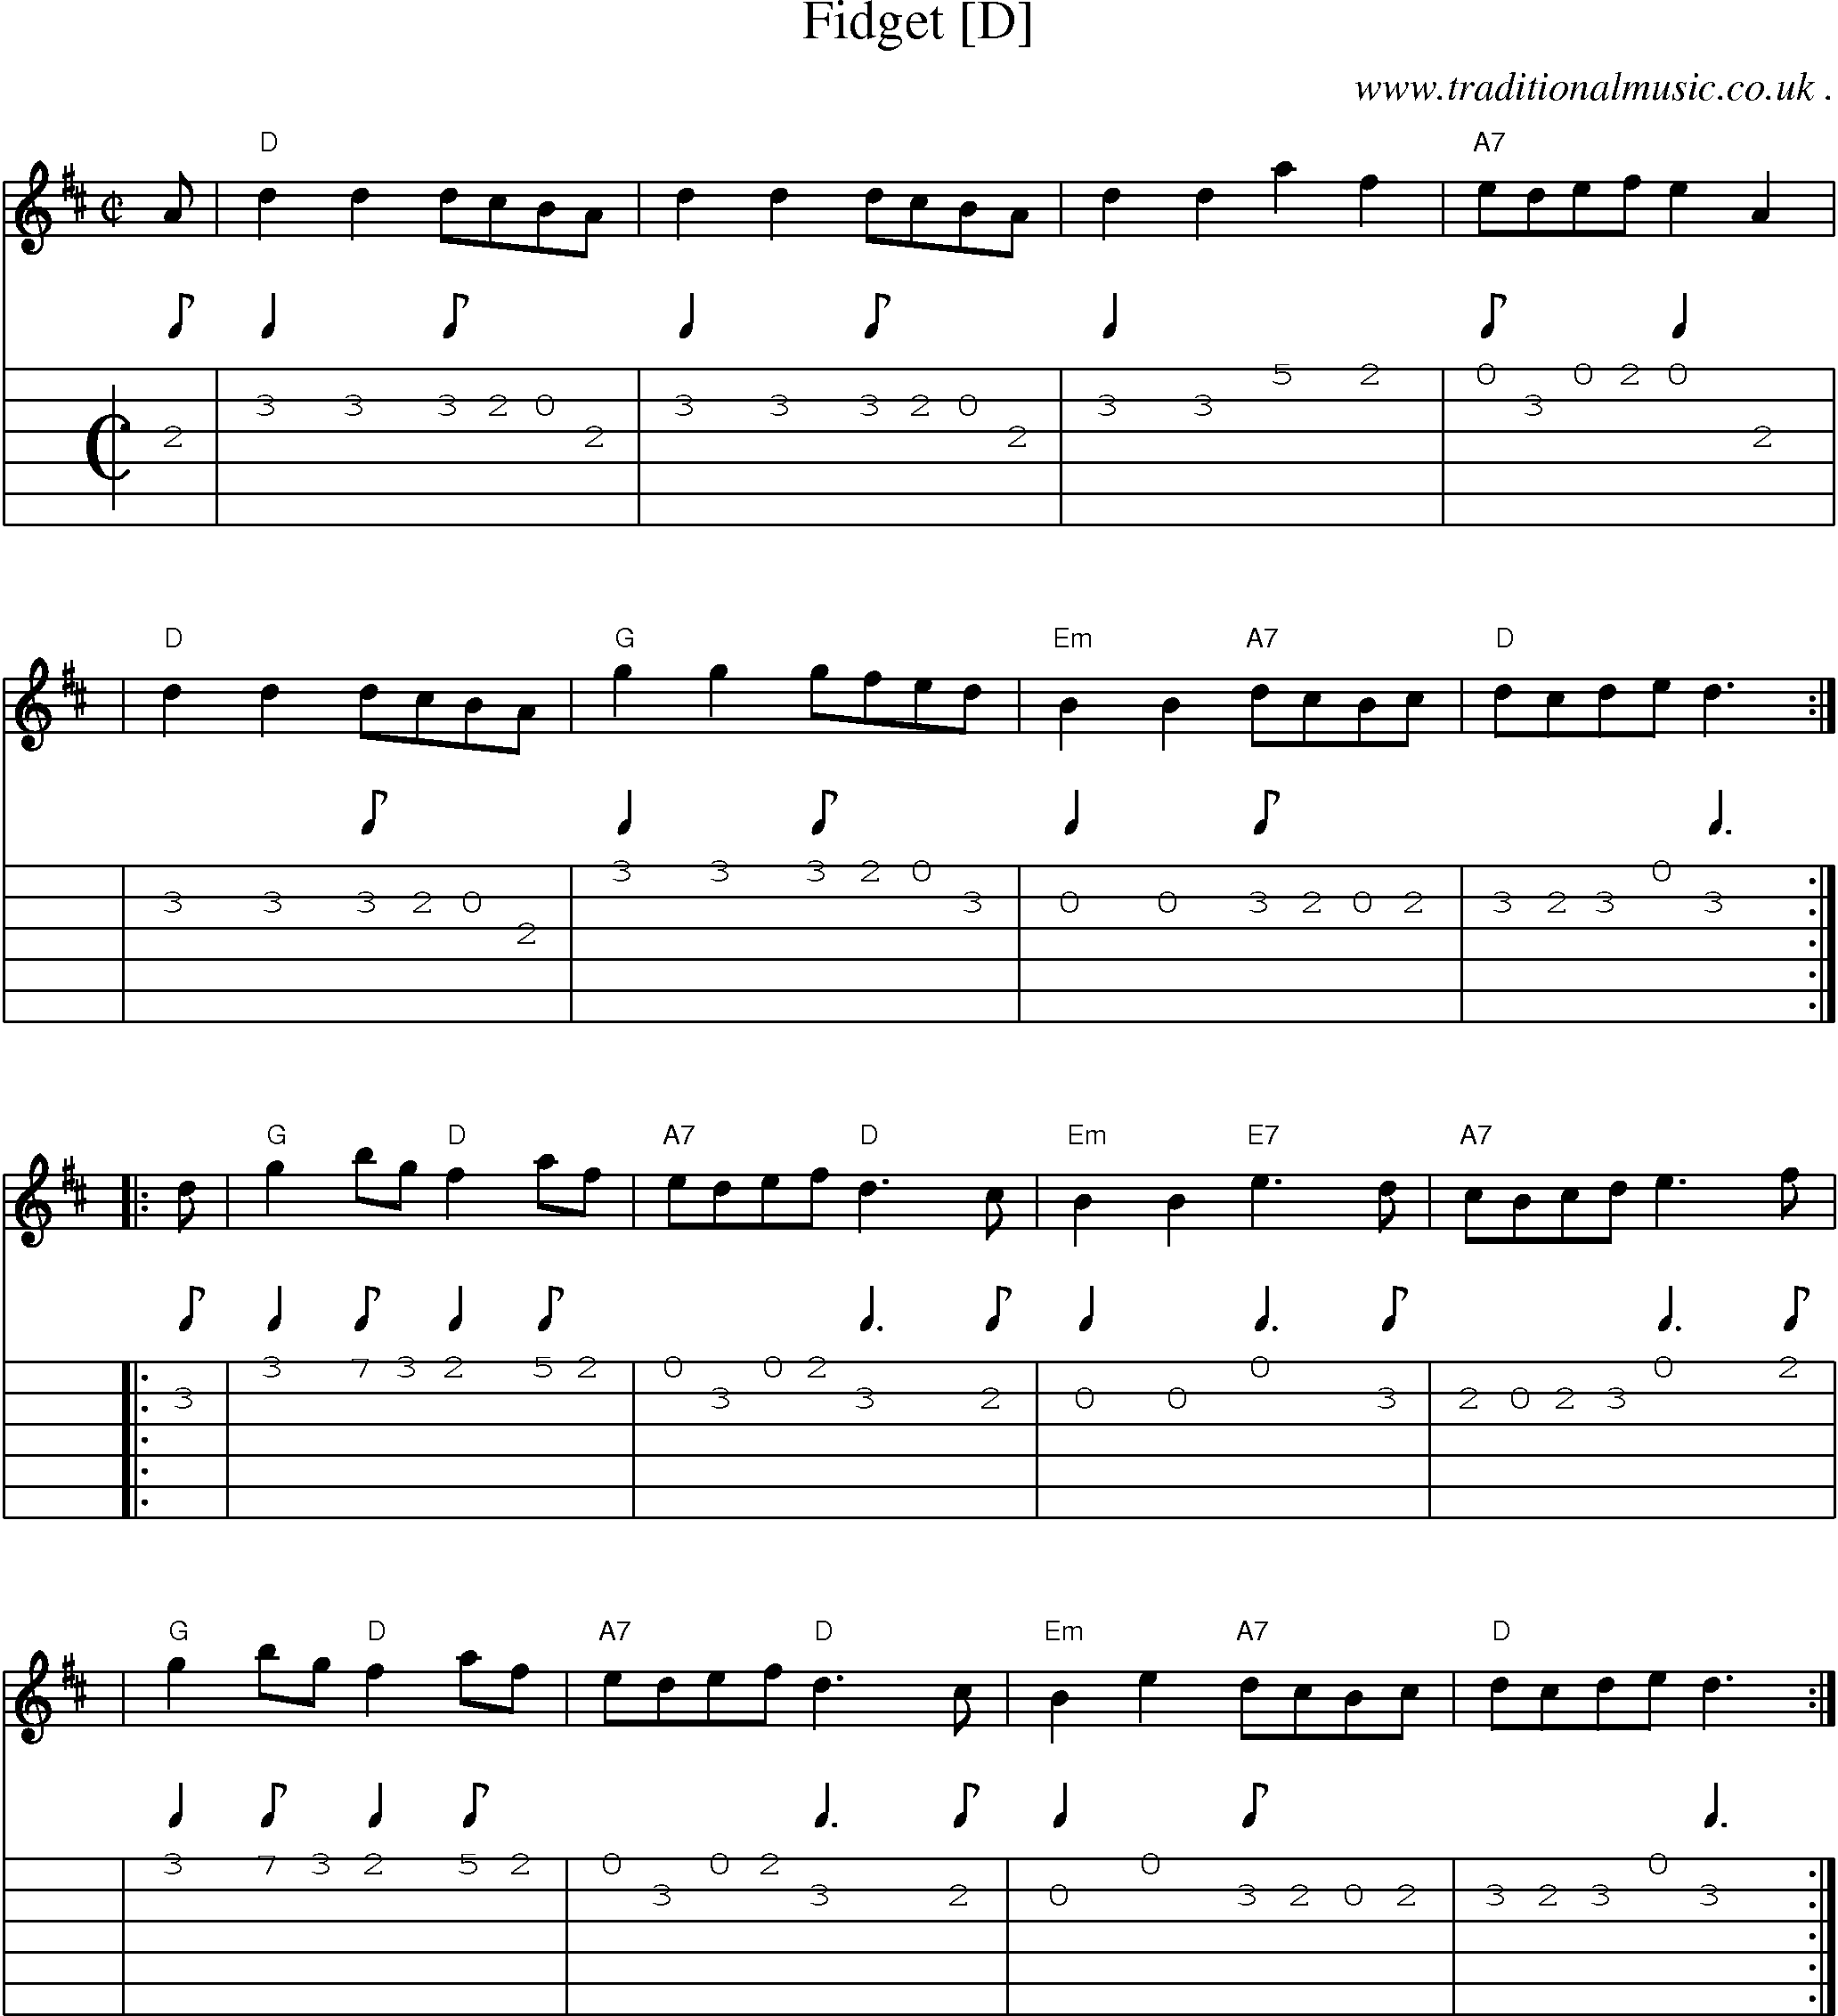 Sheet-music  score, Chords and Guitar Tabs for Fidget [d]